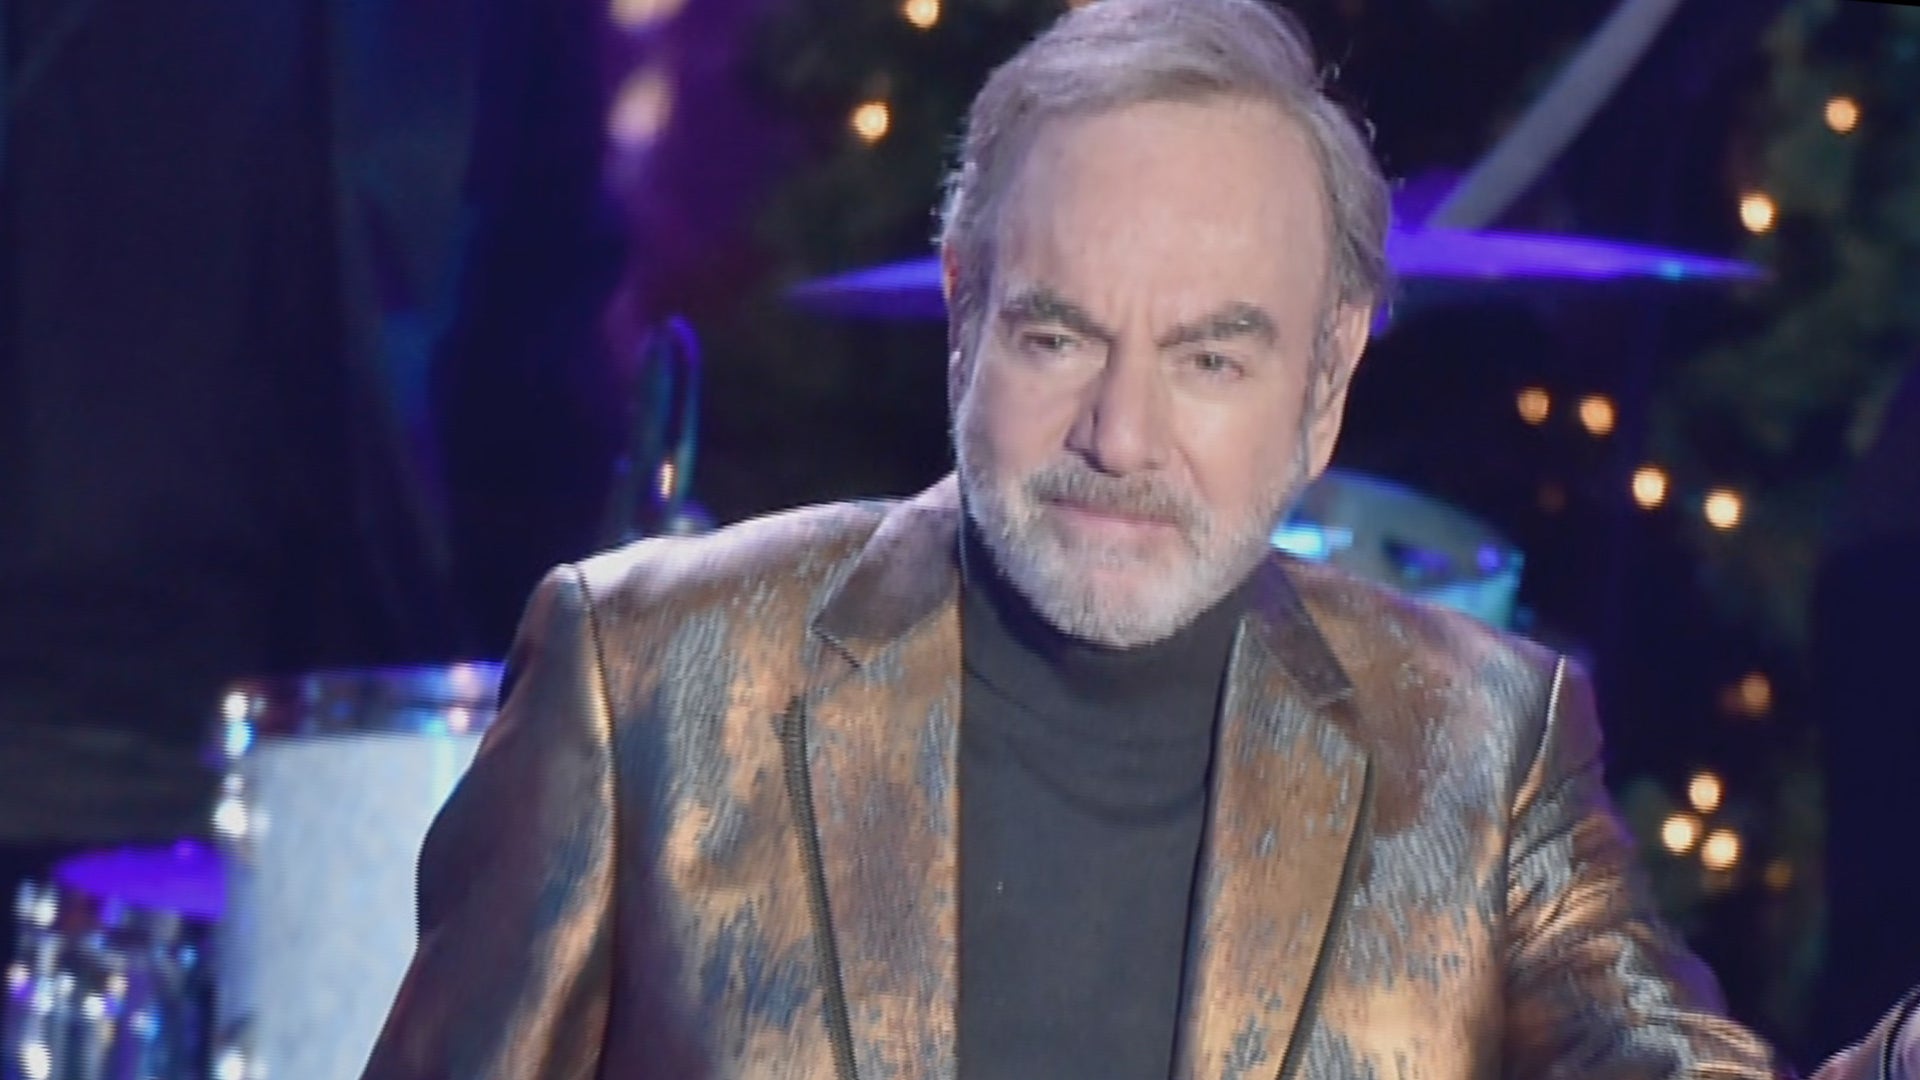 Neil Diamond says he has Parkinson's disease, will retire from touring